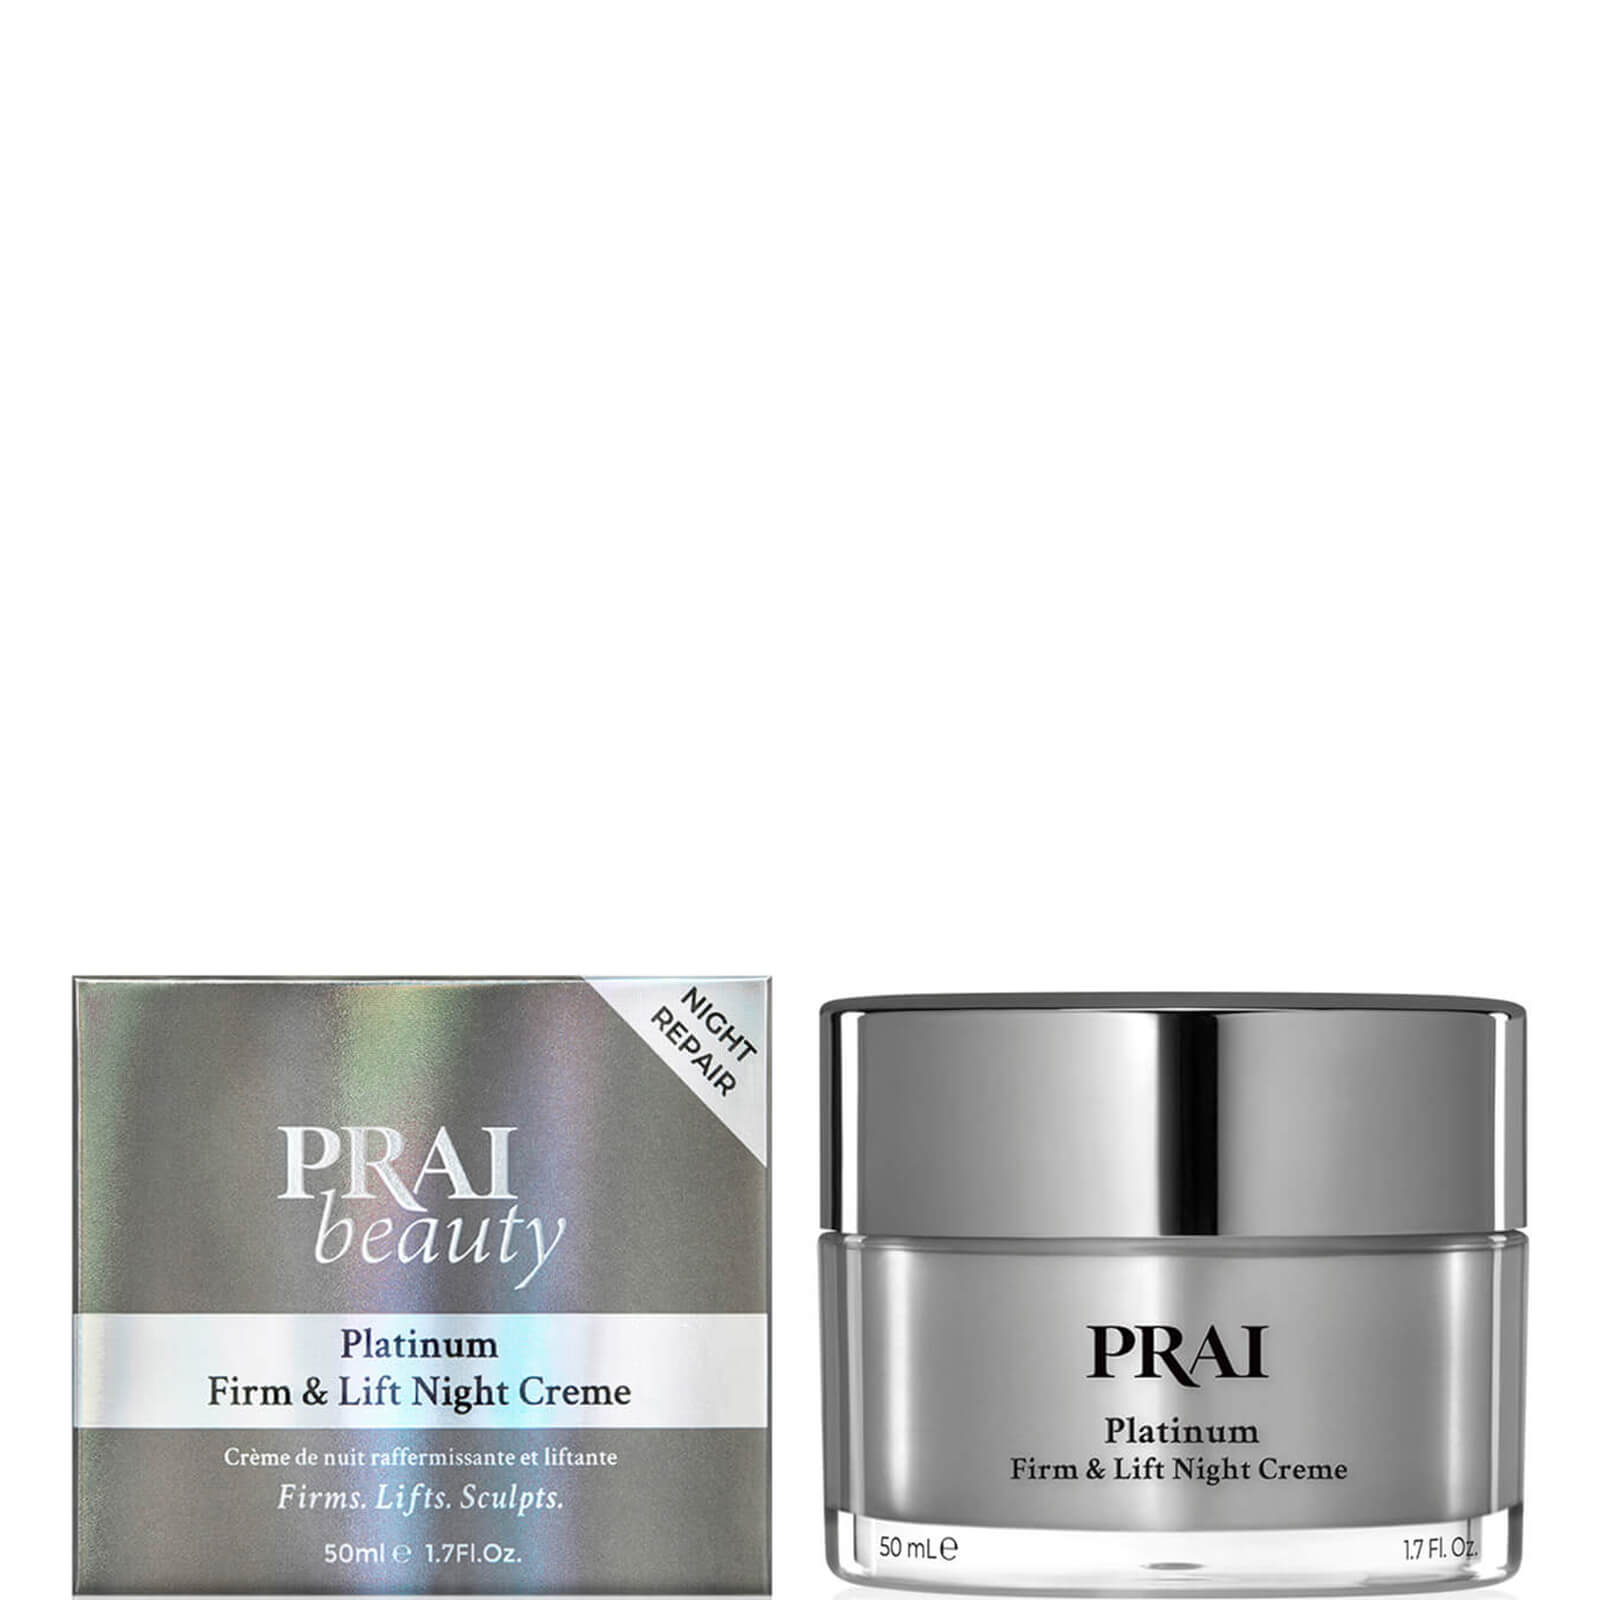 Artikel klicken und genauer betrachten! - Saturated in antioxidant-loaded platinum and nourishing shea butter, the PRAI Platinum Firm and Lift Night Crème seeks to plump and refine your skin while recharging moisture levels as you sleep.   The antioxidant-fuelled formula supports the skin's resilience to external aggressors, while mineral-rich pearl powder and luxurious PRAI oil harmonise to reveal a glowing, youthful-looking complexion that is soft and supple. | im Online Shop kaufen